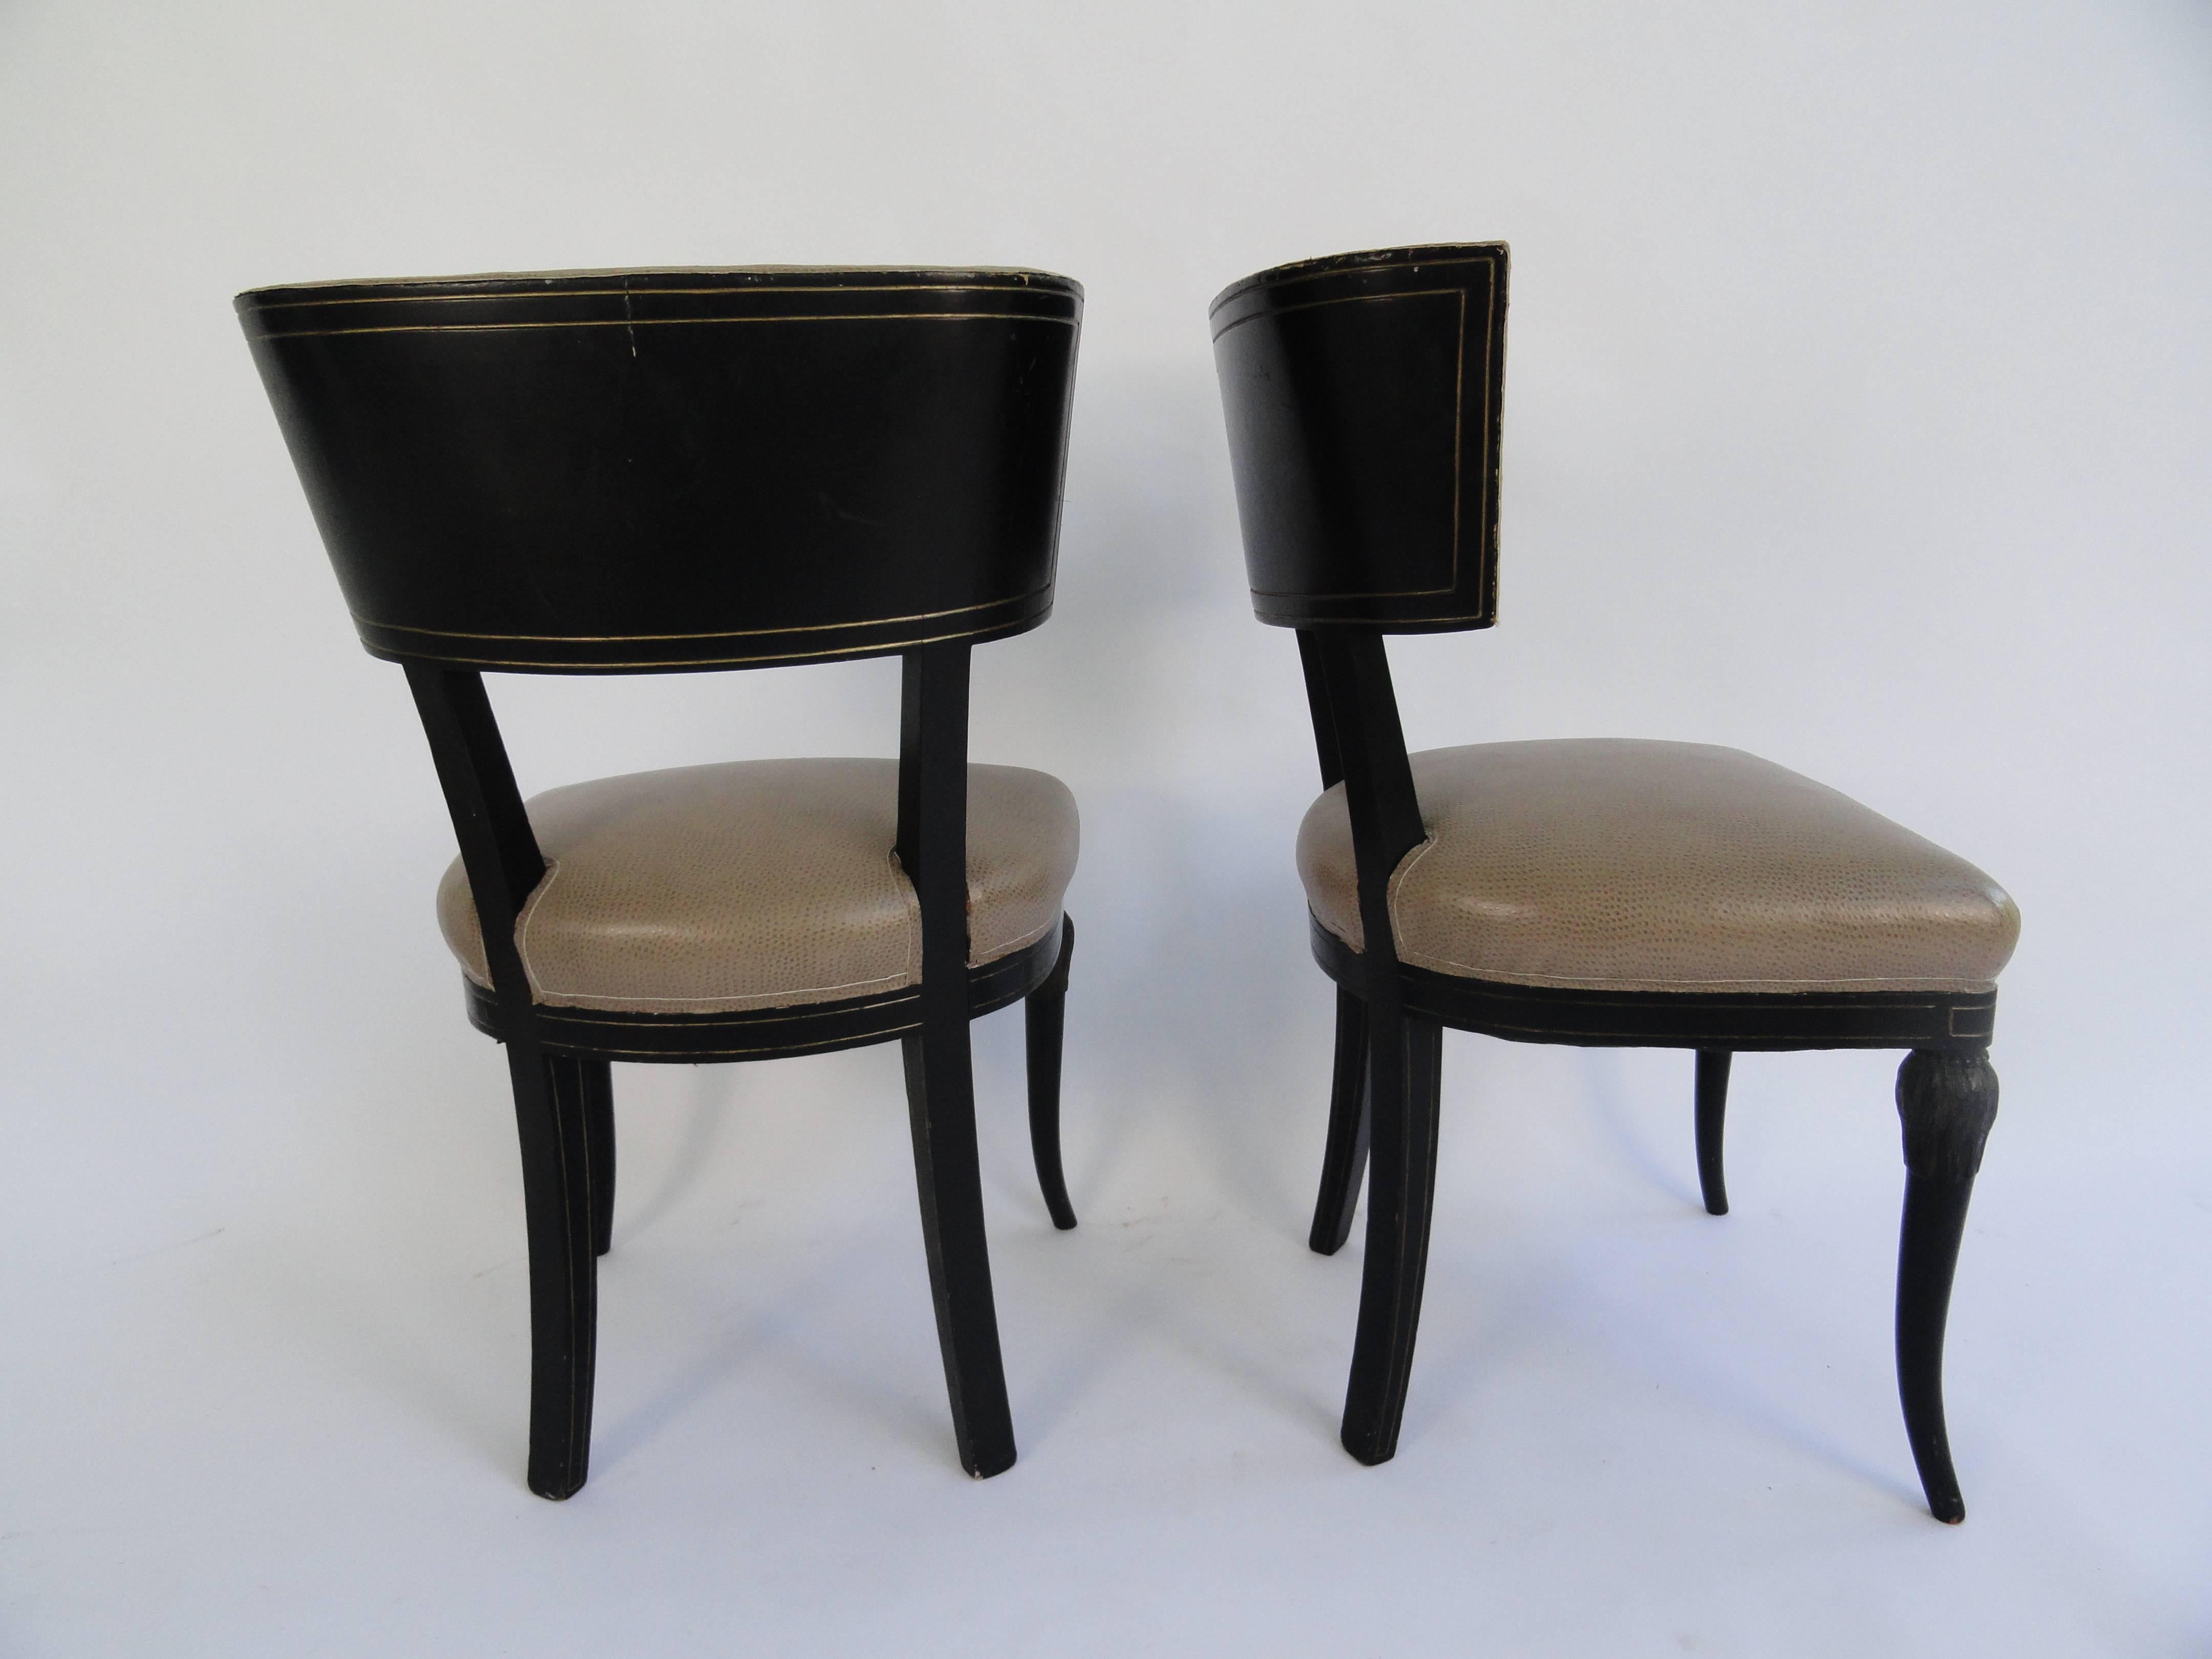 Set of four Maison Jansen side chairs with original ebony finish with gilt detail upholstered in faux ostrich.